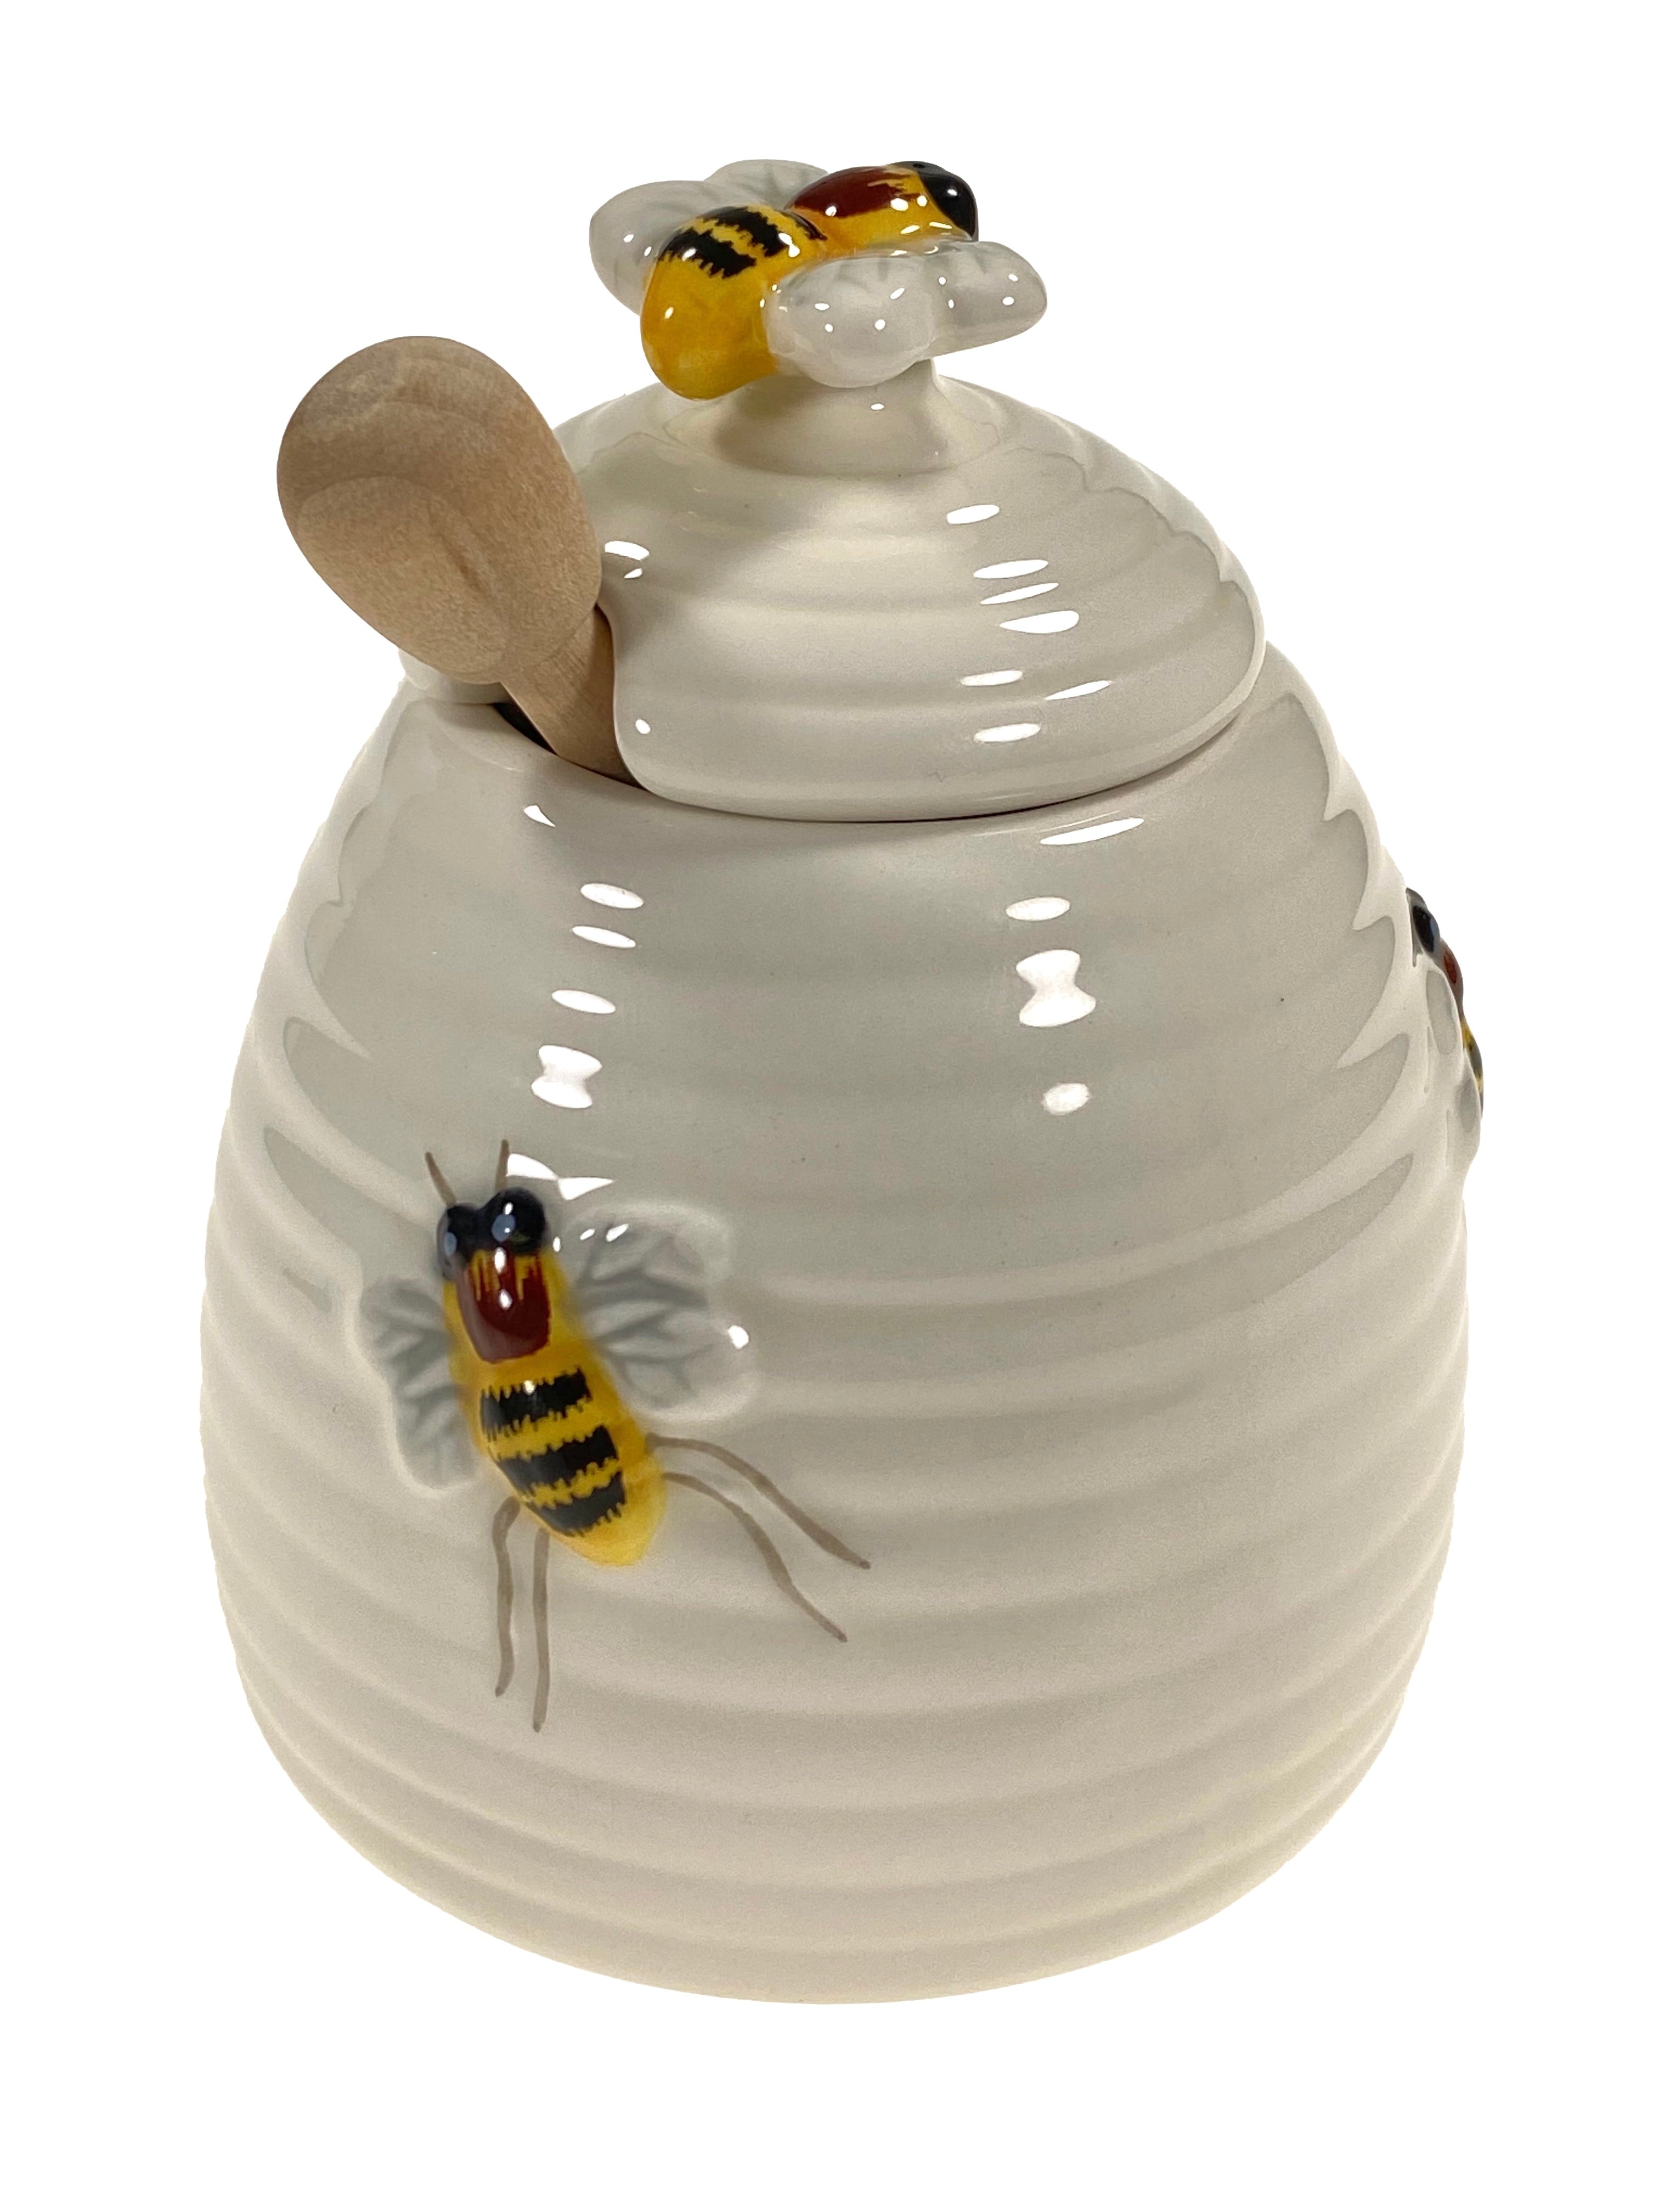 Bee Hive Honey Pot With Wooden Dipper    